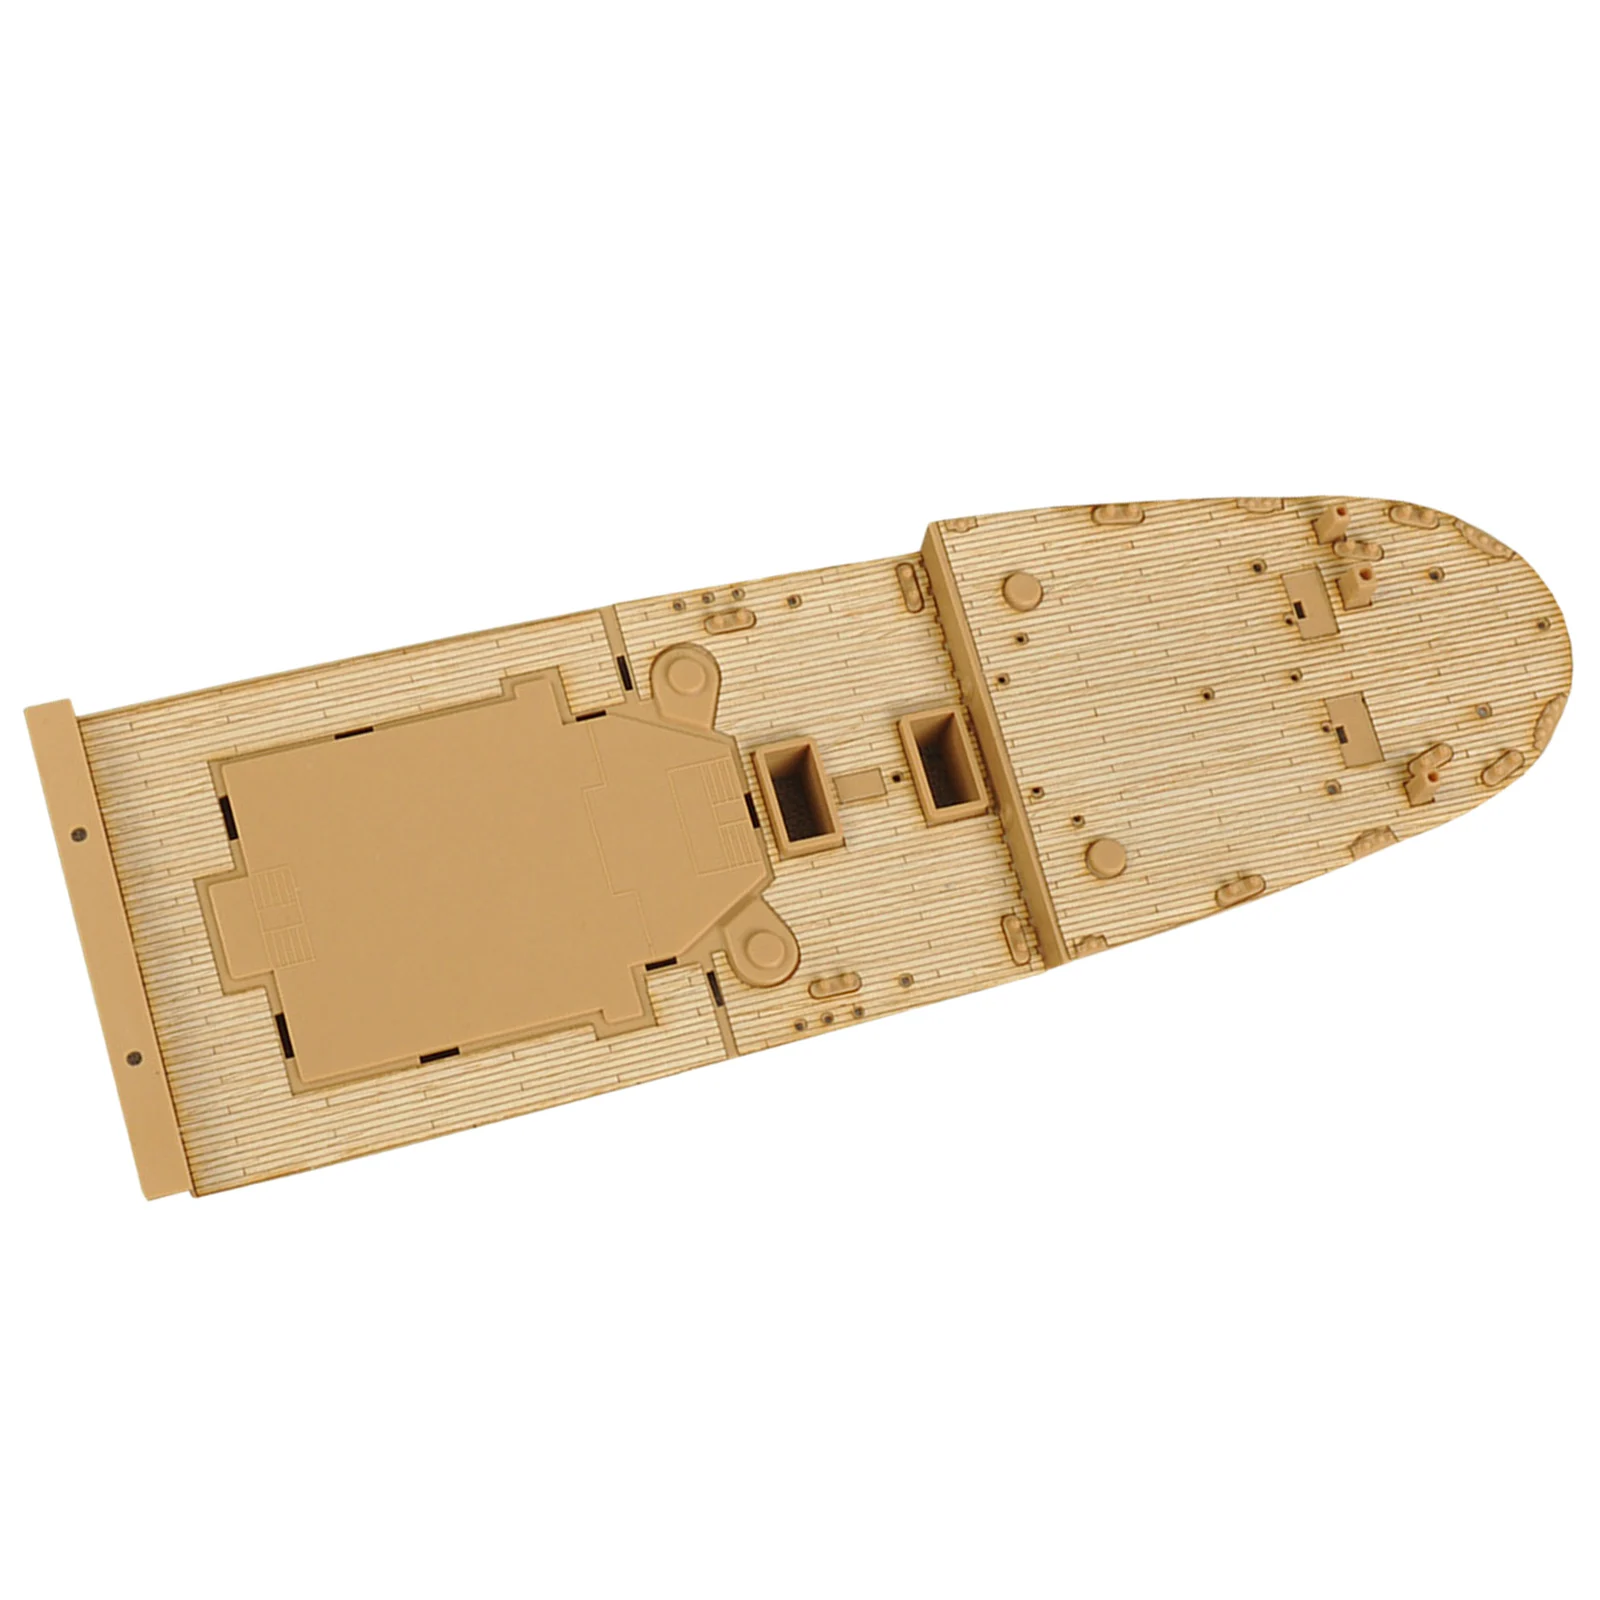 1/400 Ship Model Building Kit Wooden Deck for Academy 14215 Upgrade Part